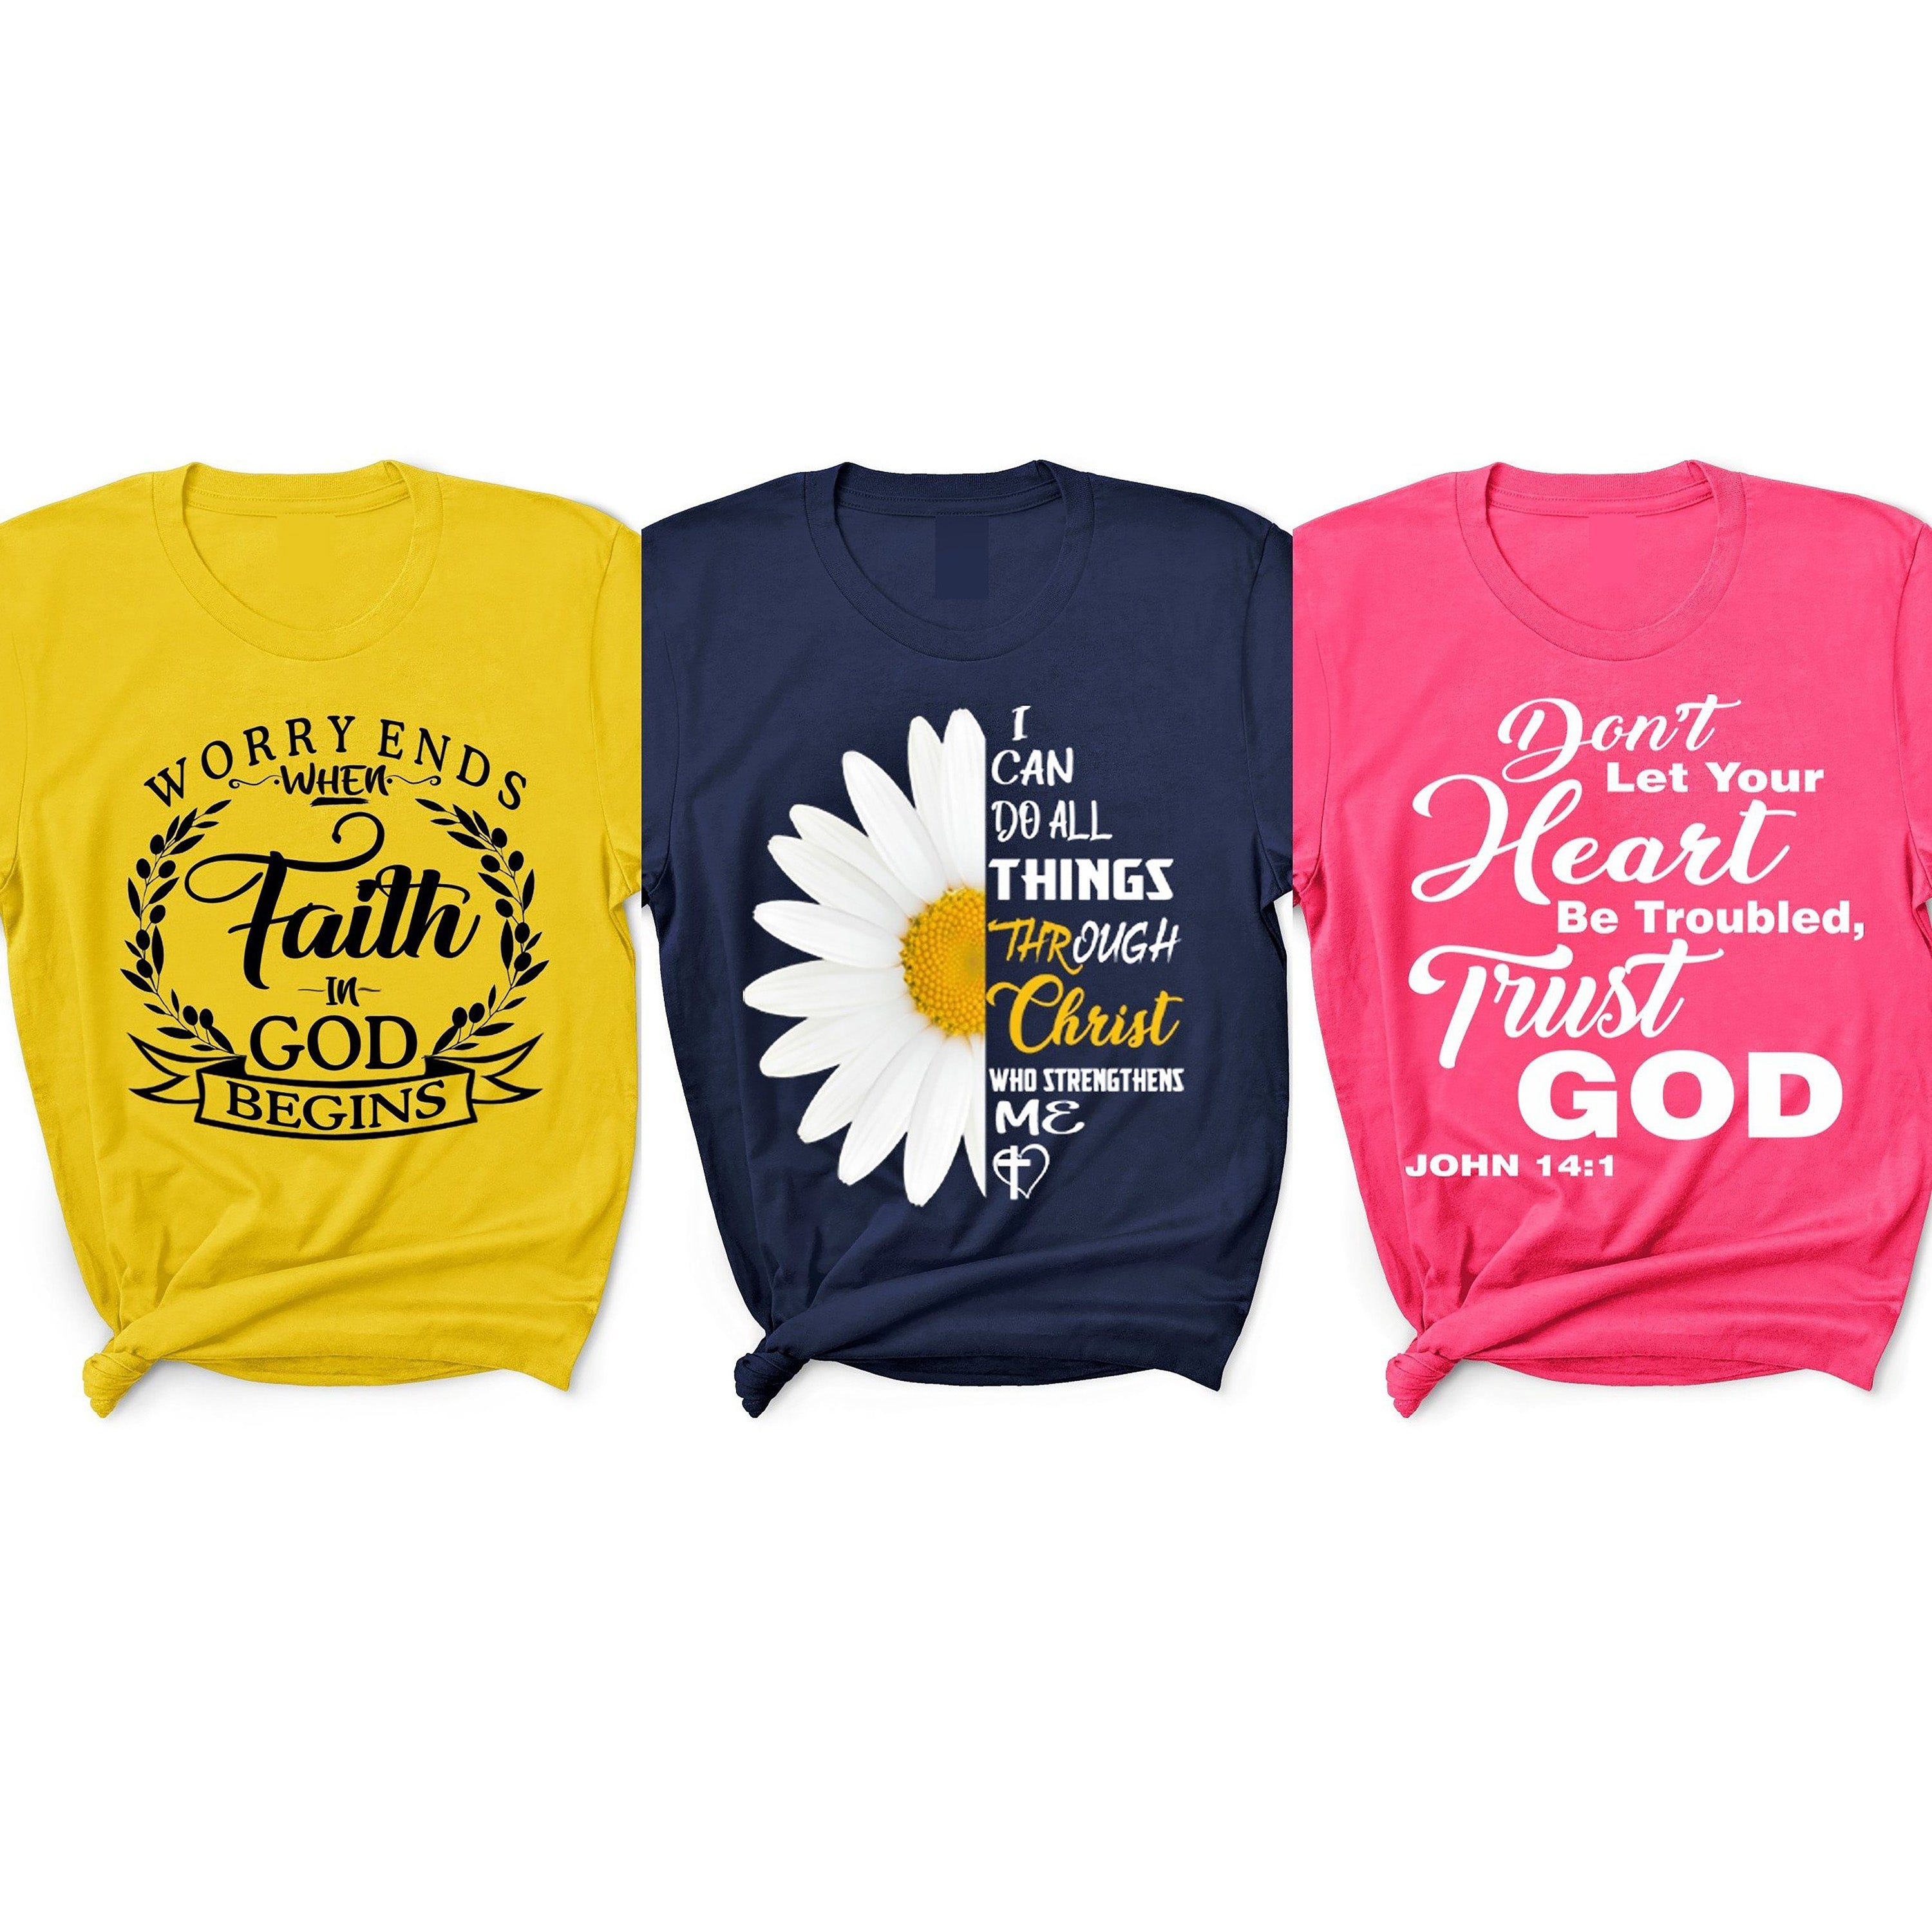 "Combo Pack of Faith+Christ+Trust God"- in new colors.